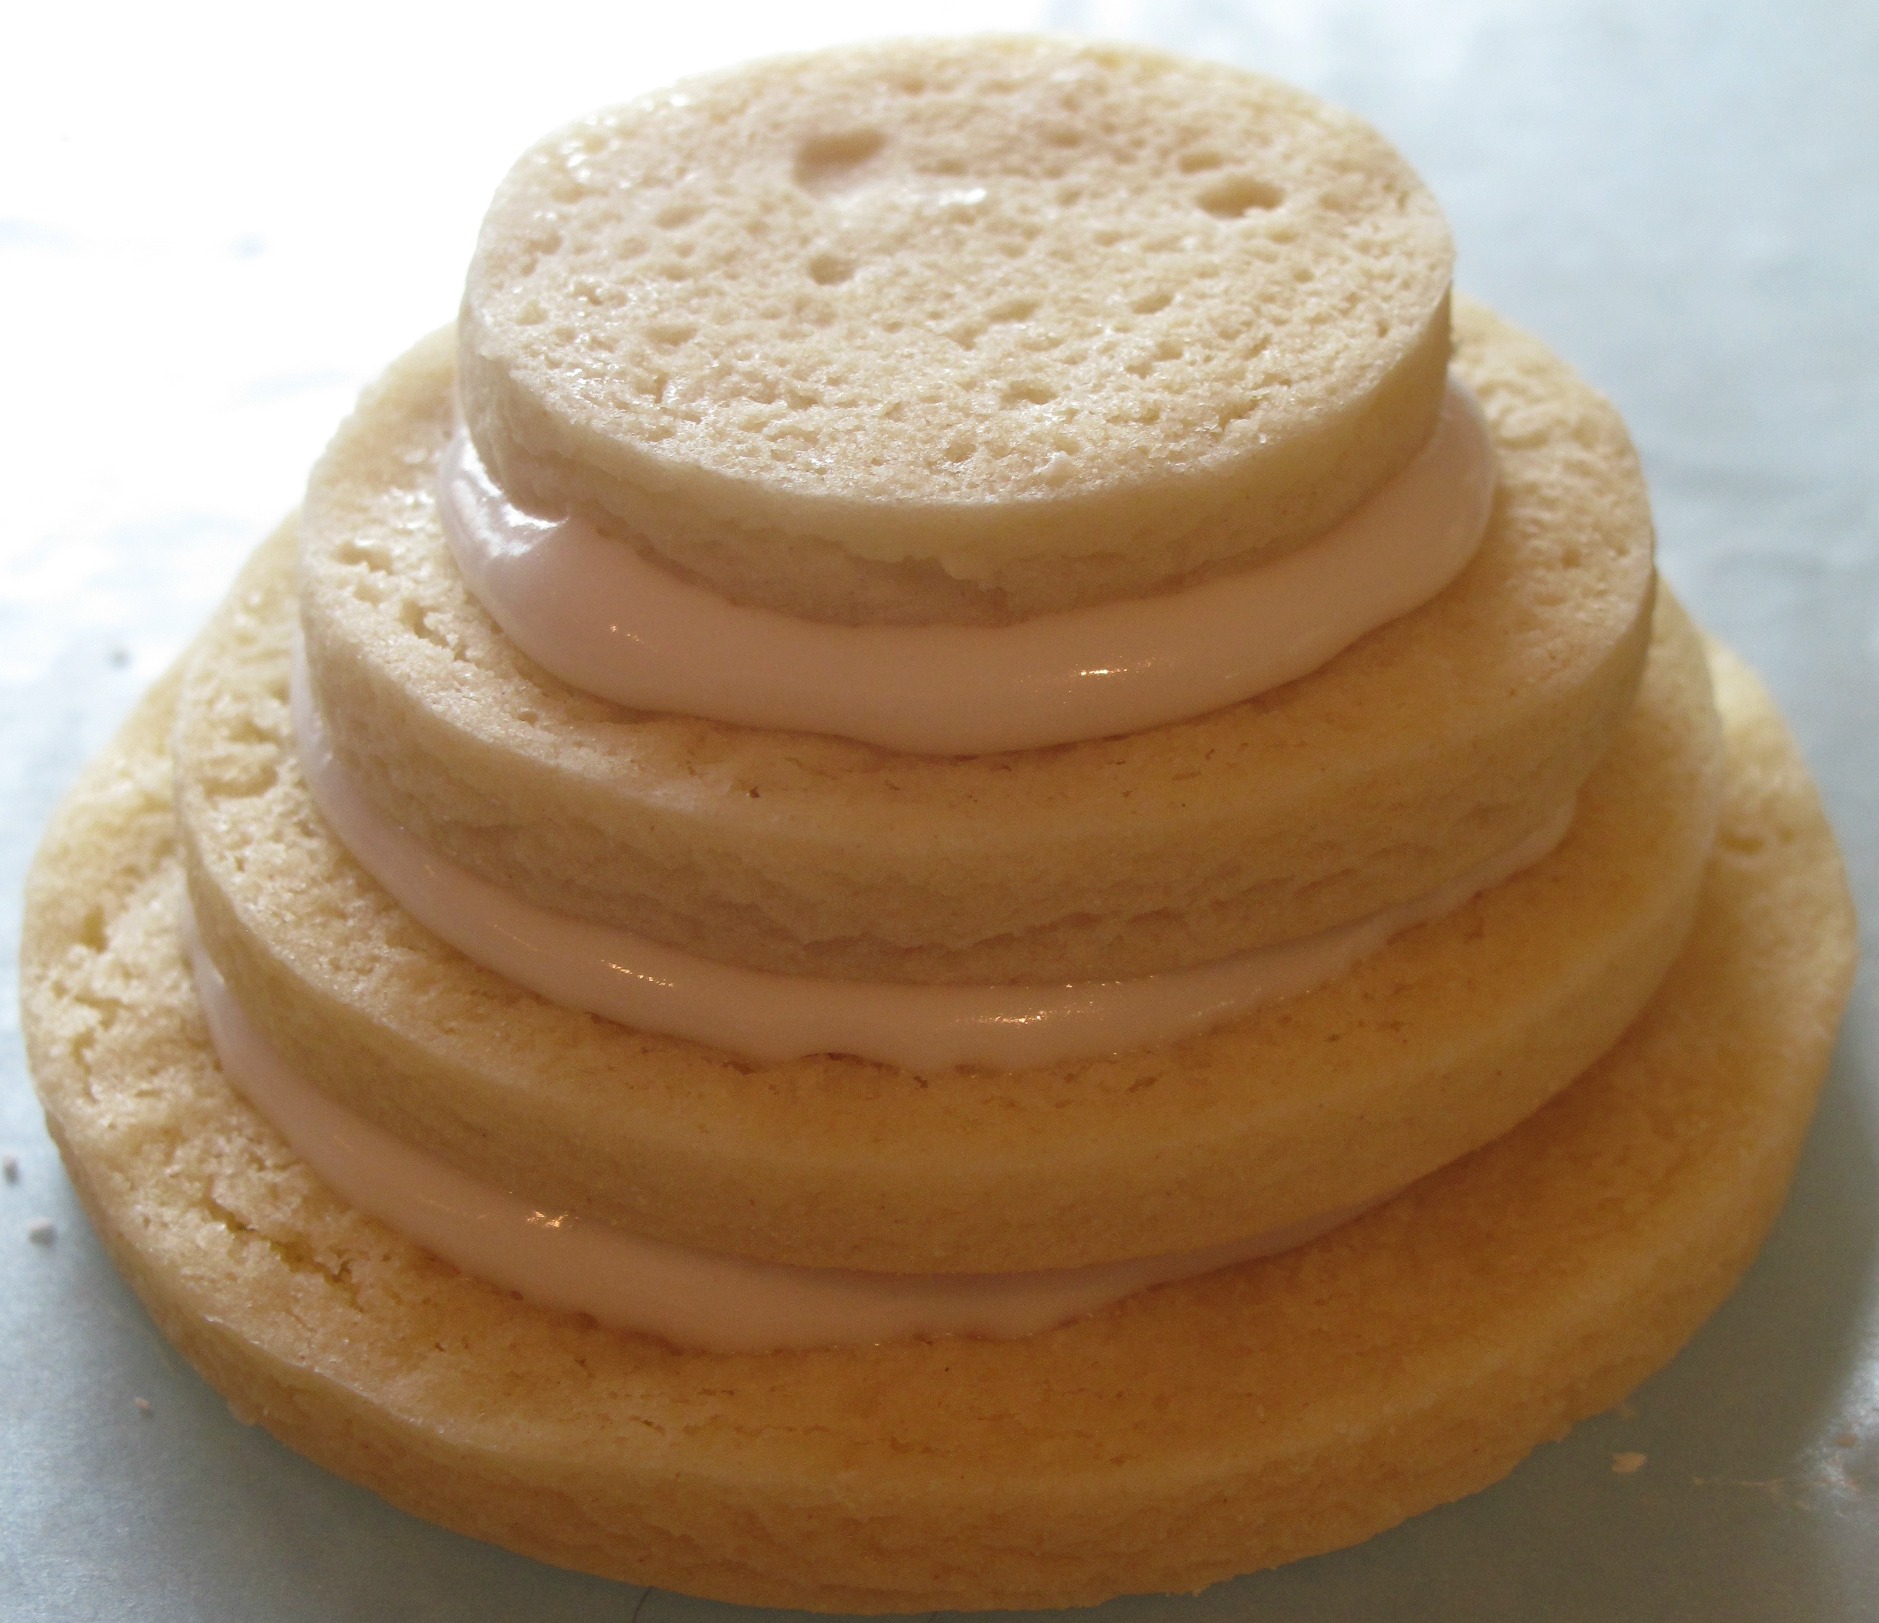 A stack of cookies attached together with corn syrup icing between layers.